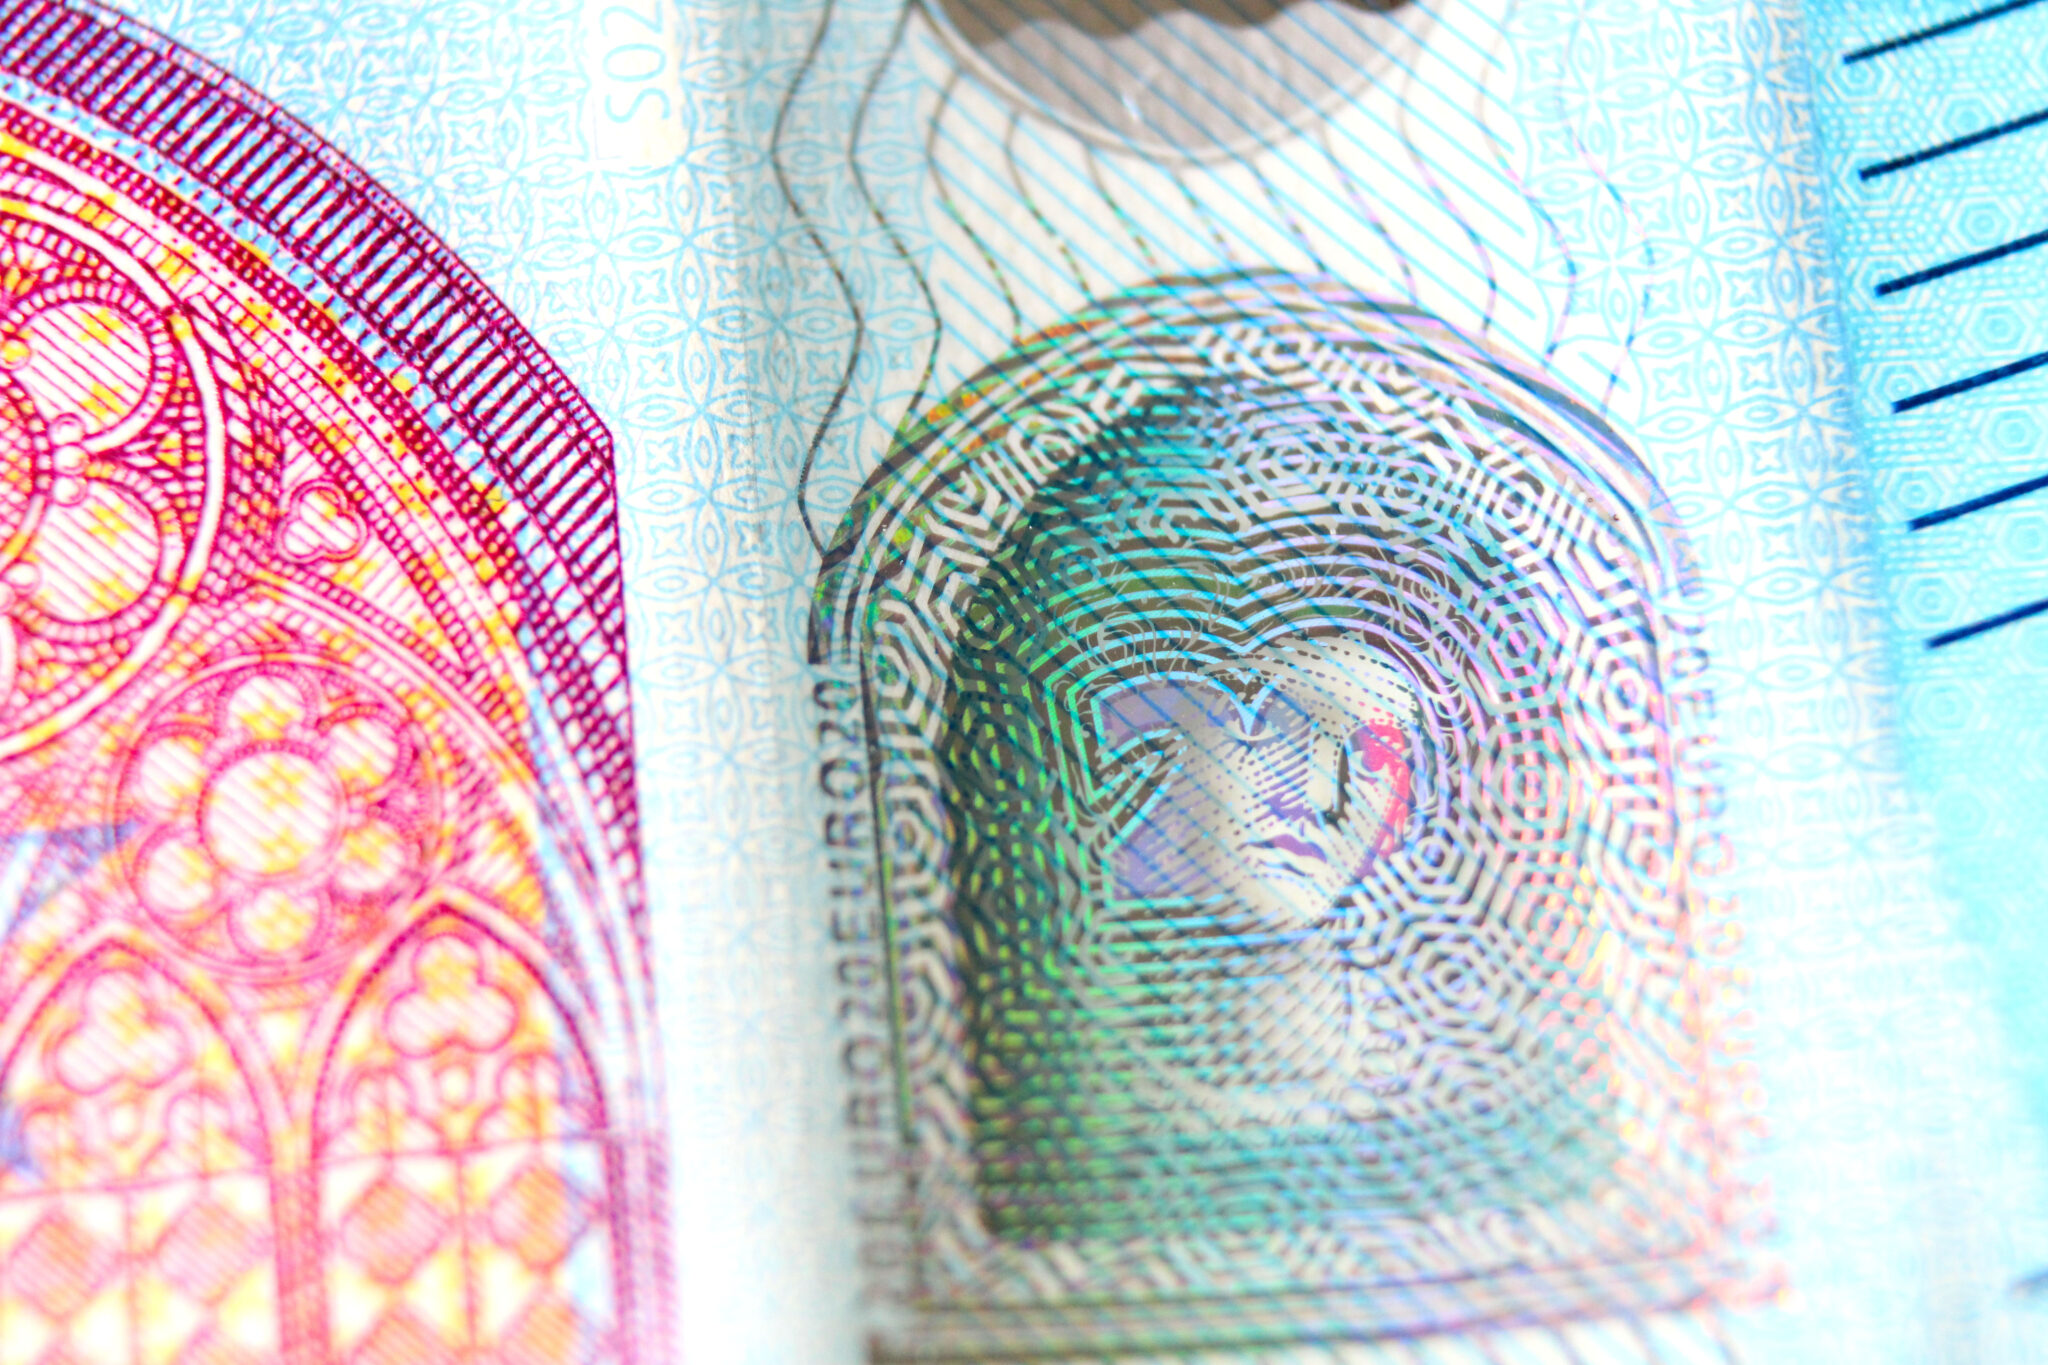 Are Polymer Banknotes Here to Stay? | Plastics Engineering